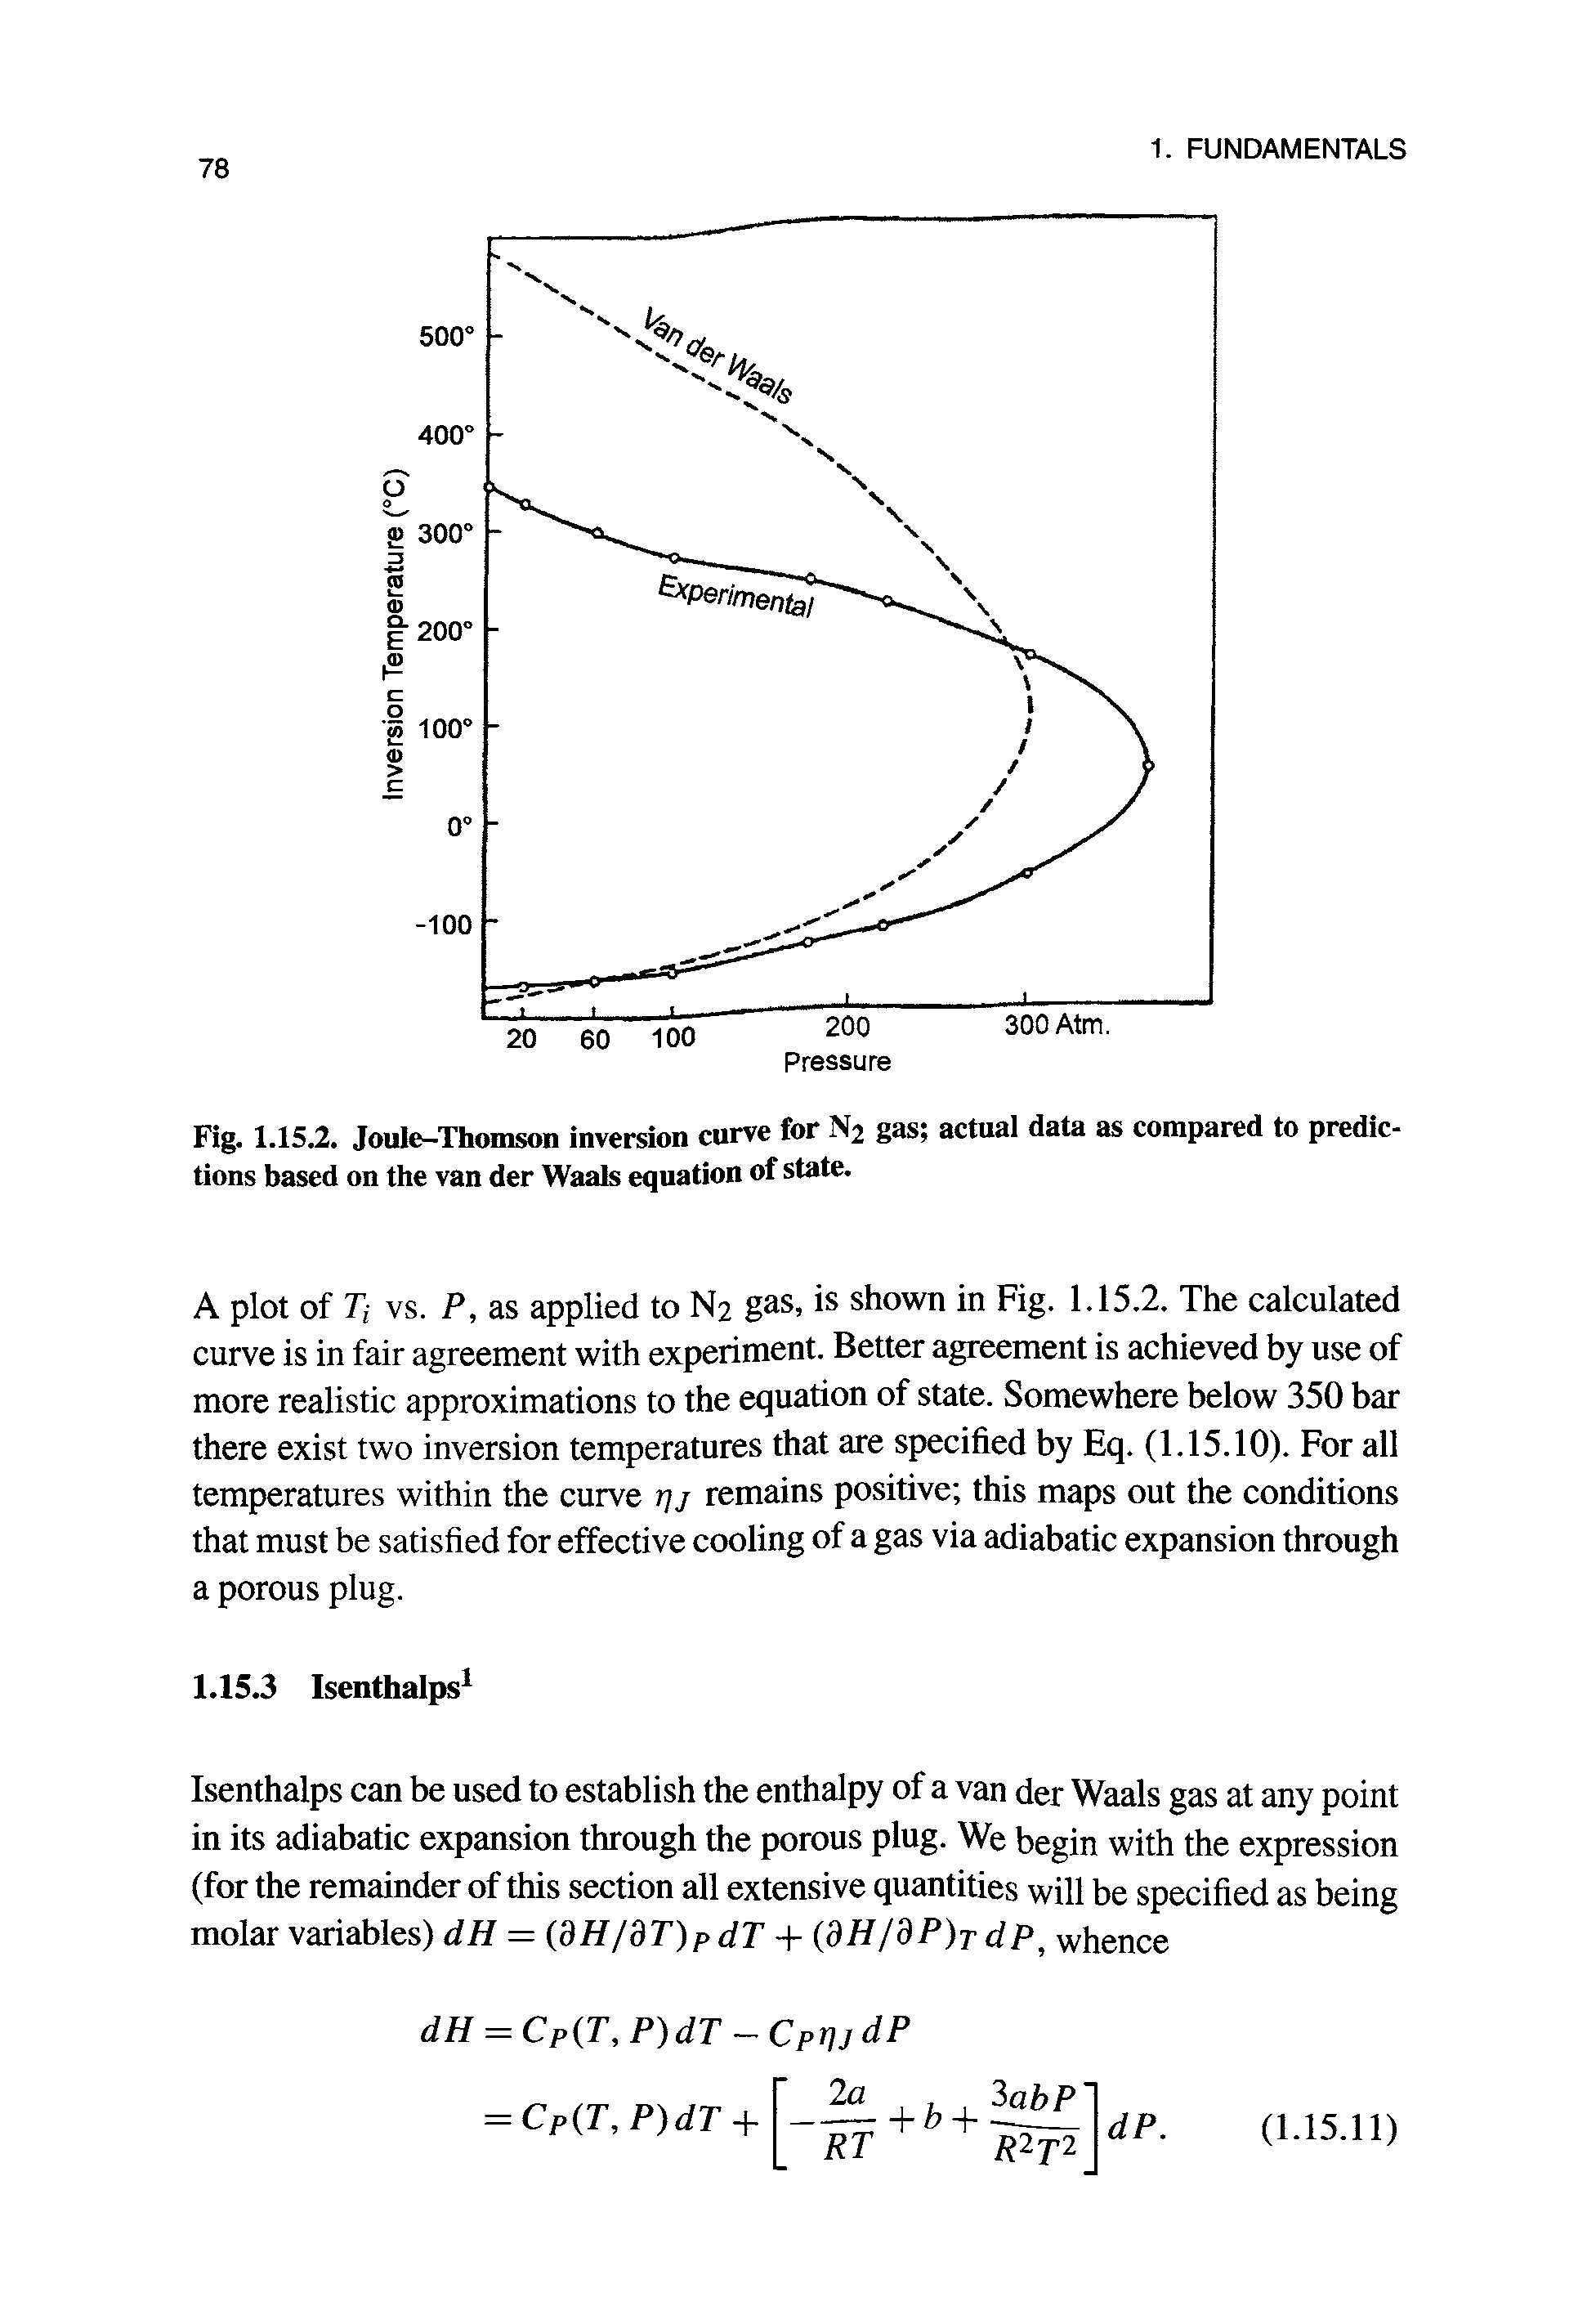 Fig. 1.15.2. Joulfr-Thomson inversion curve for N2 gas actual data as compared to predictions based on the van der Waals equation of state.